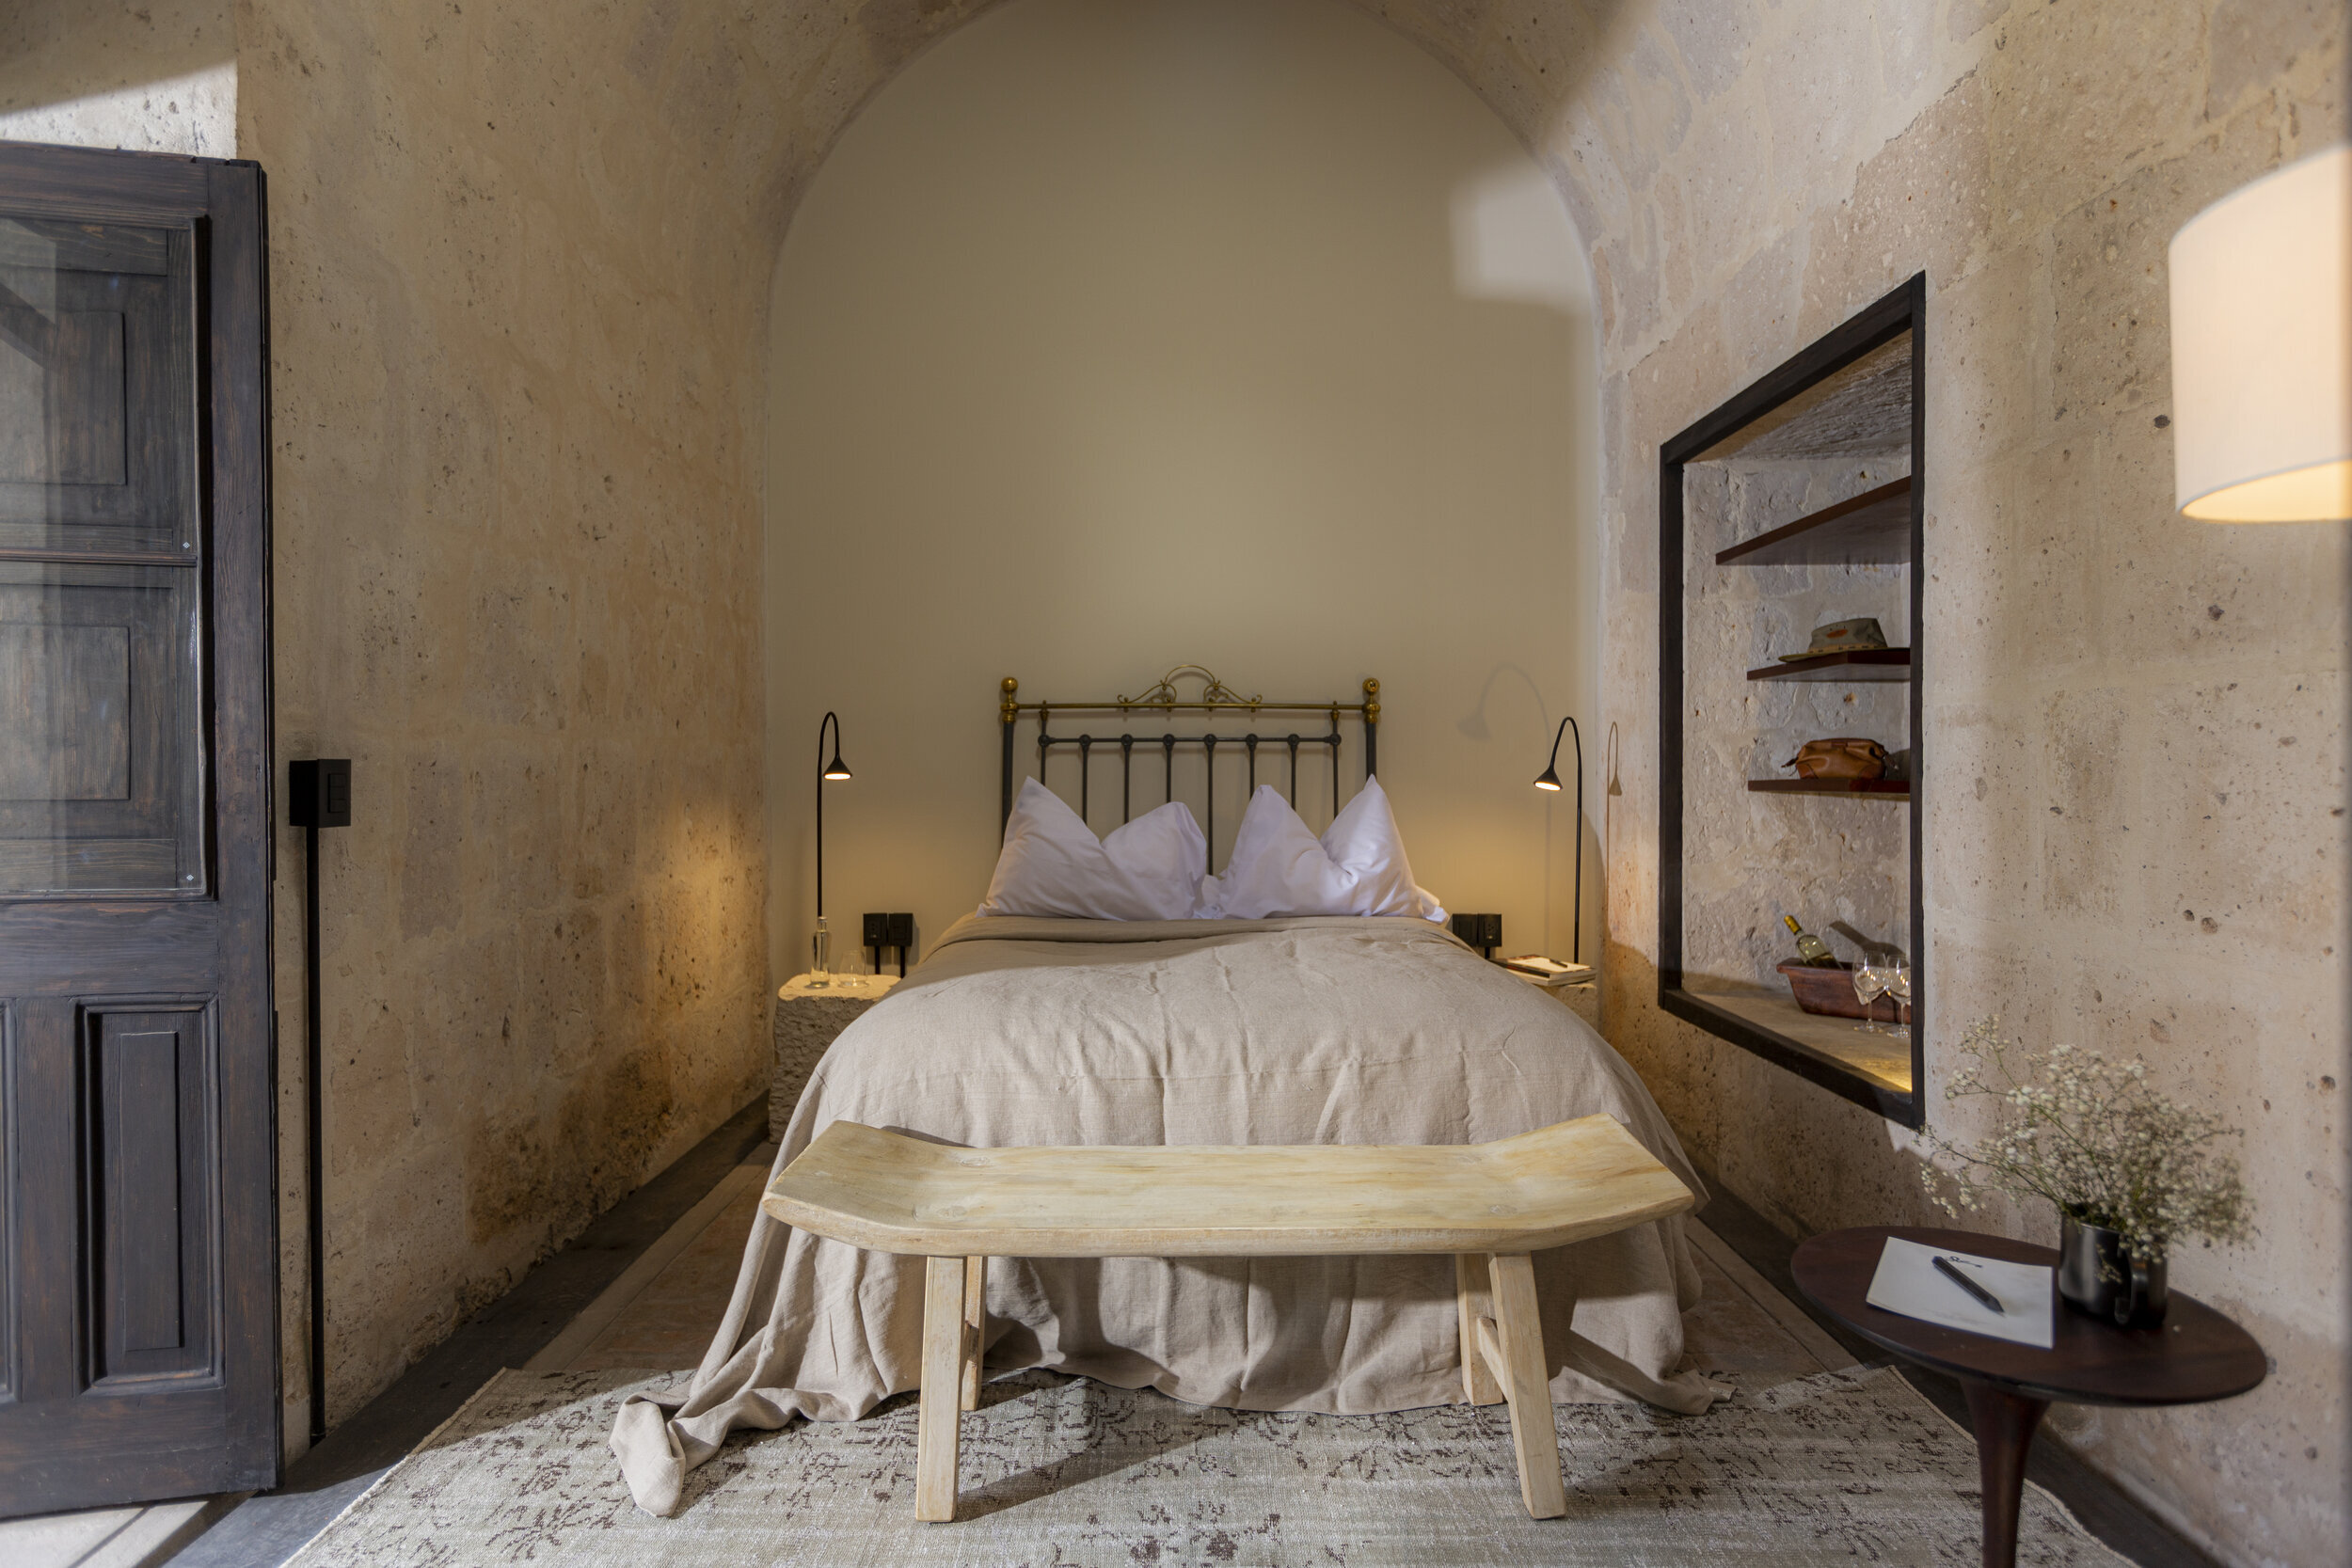 Sussurro — Hôtel Weekend  Barefoot Luxury for the Modern Nomad